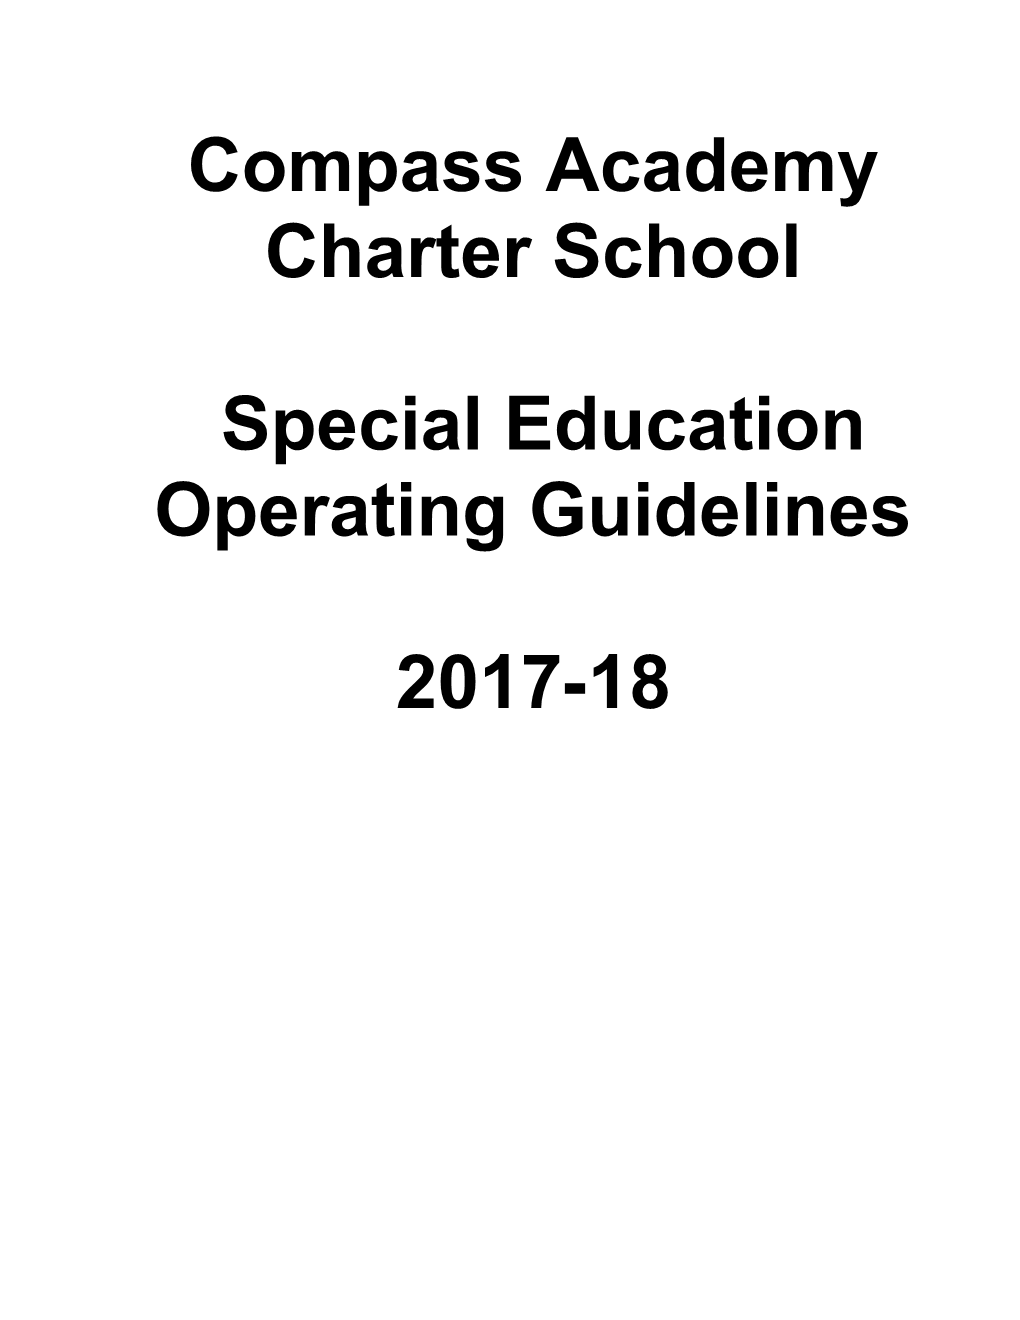 Special Education Operating Guidelines